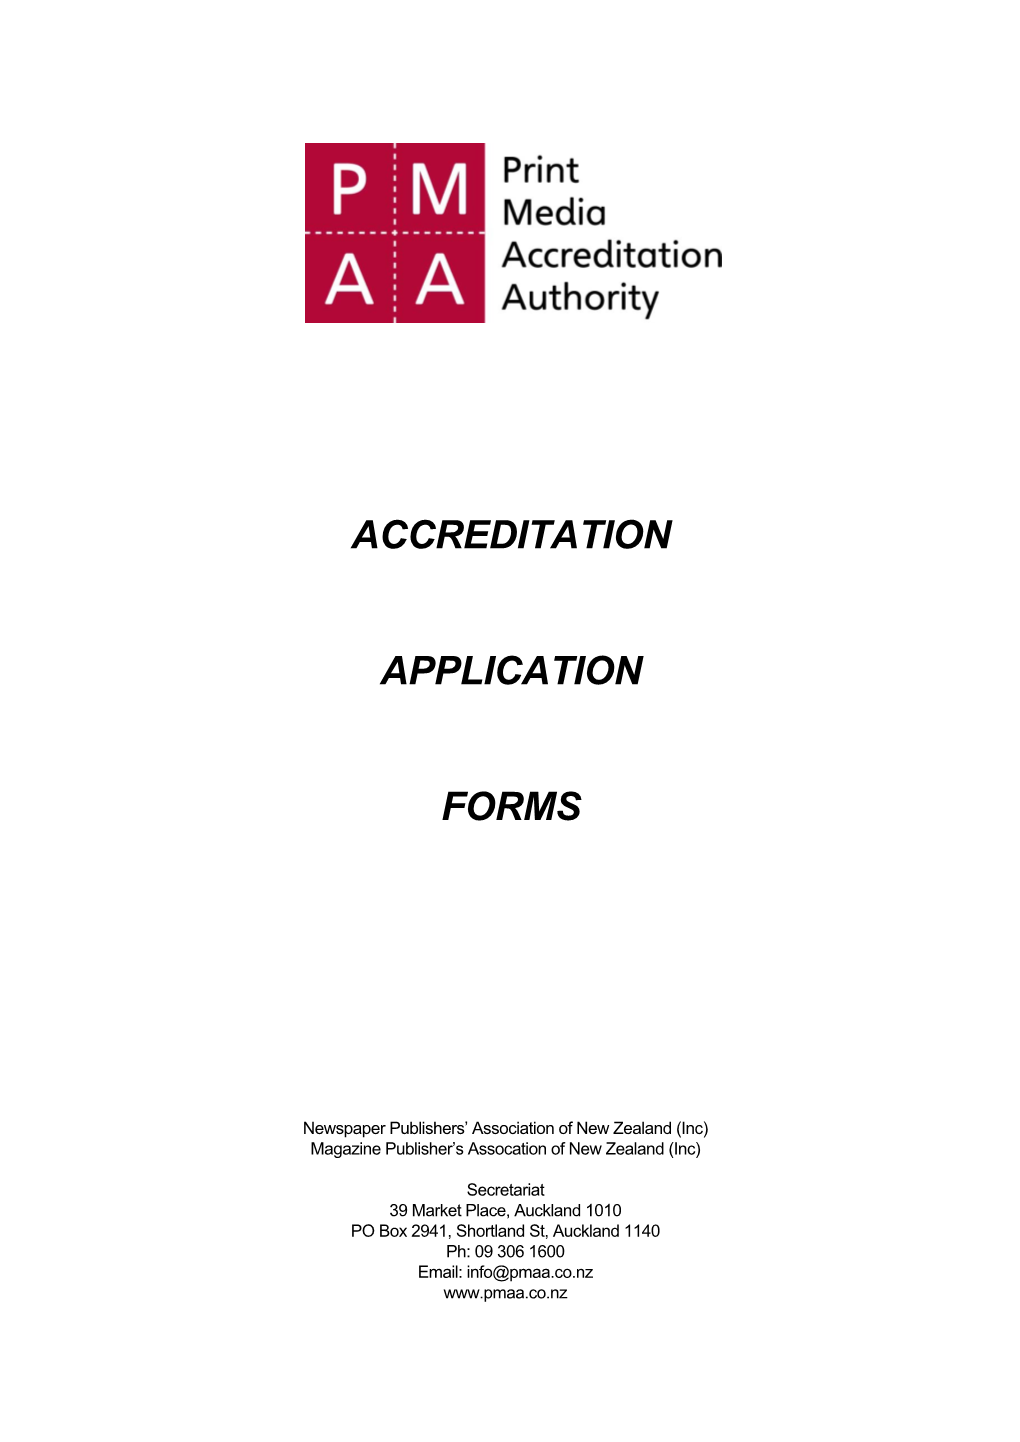 Accreditation Application Forms